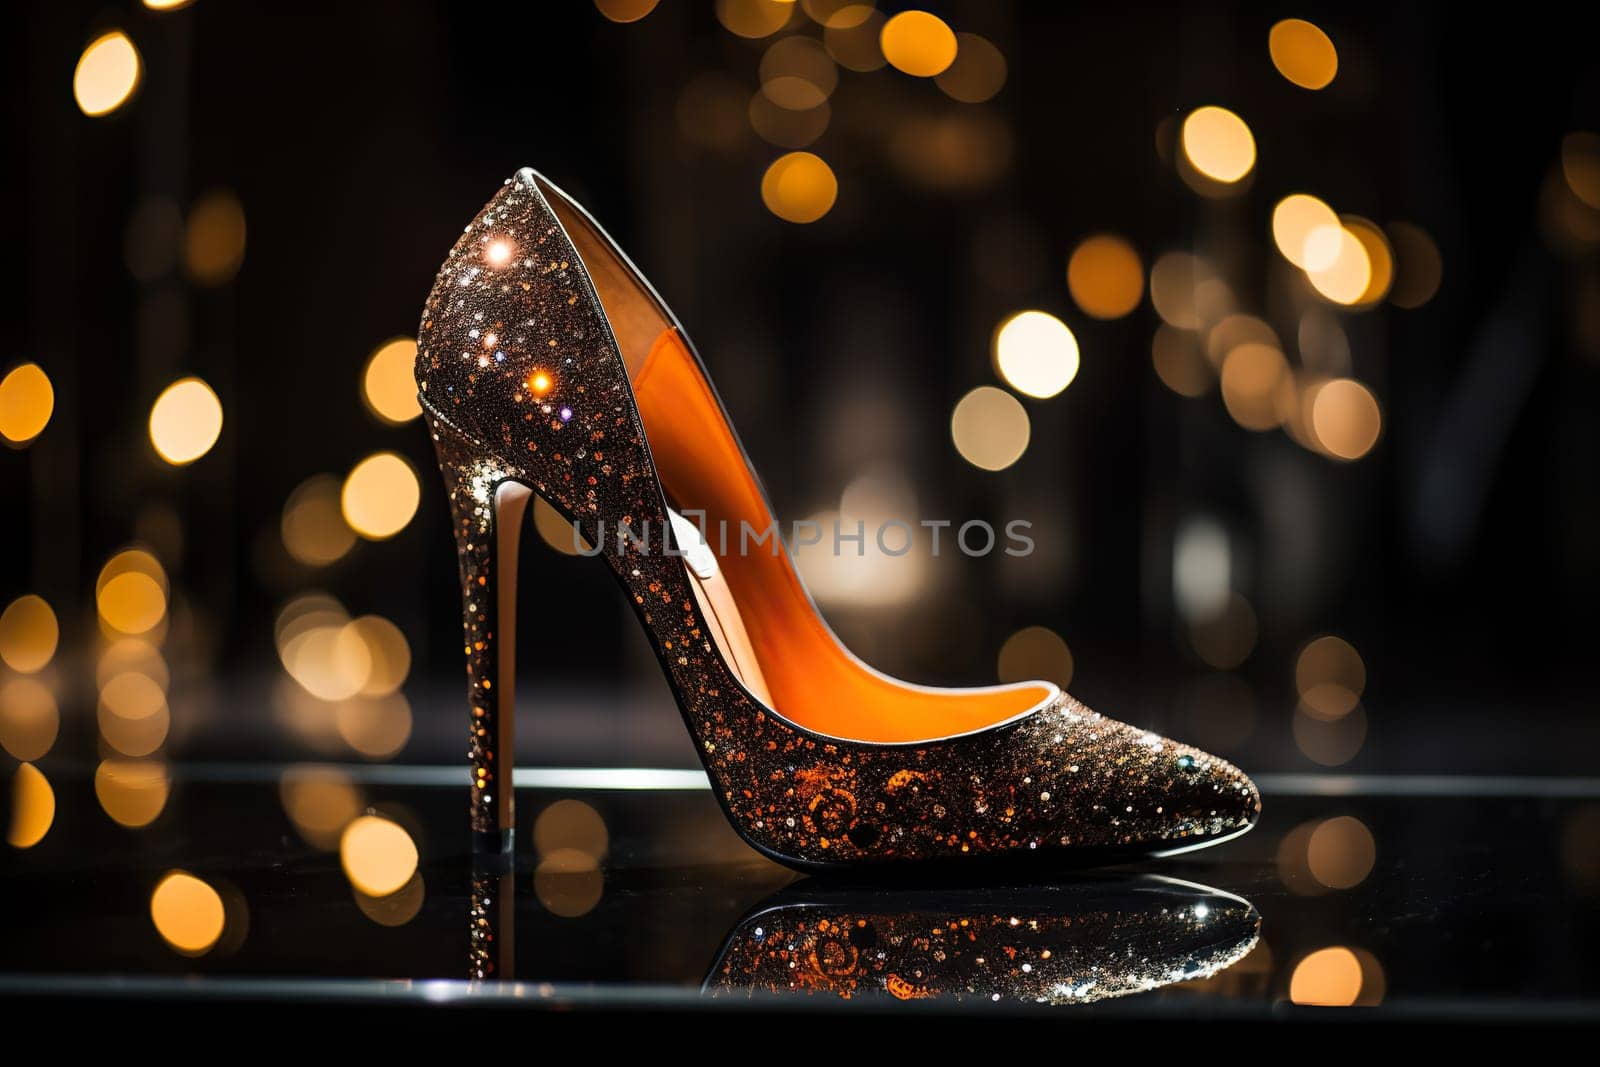 Beautiful elegant women's shoes made of golden leather with high heels, standing on a mirror surface. Festive women's shoes. Side view by Vovmar